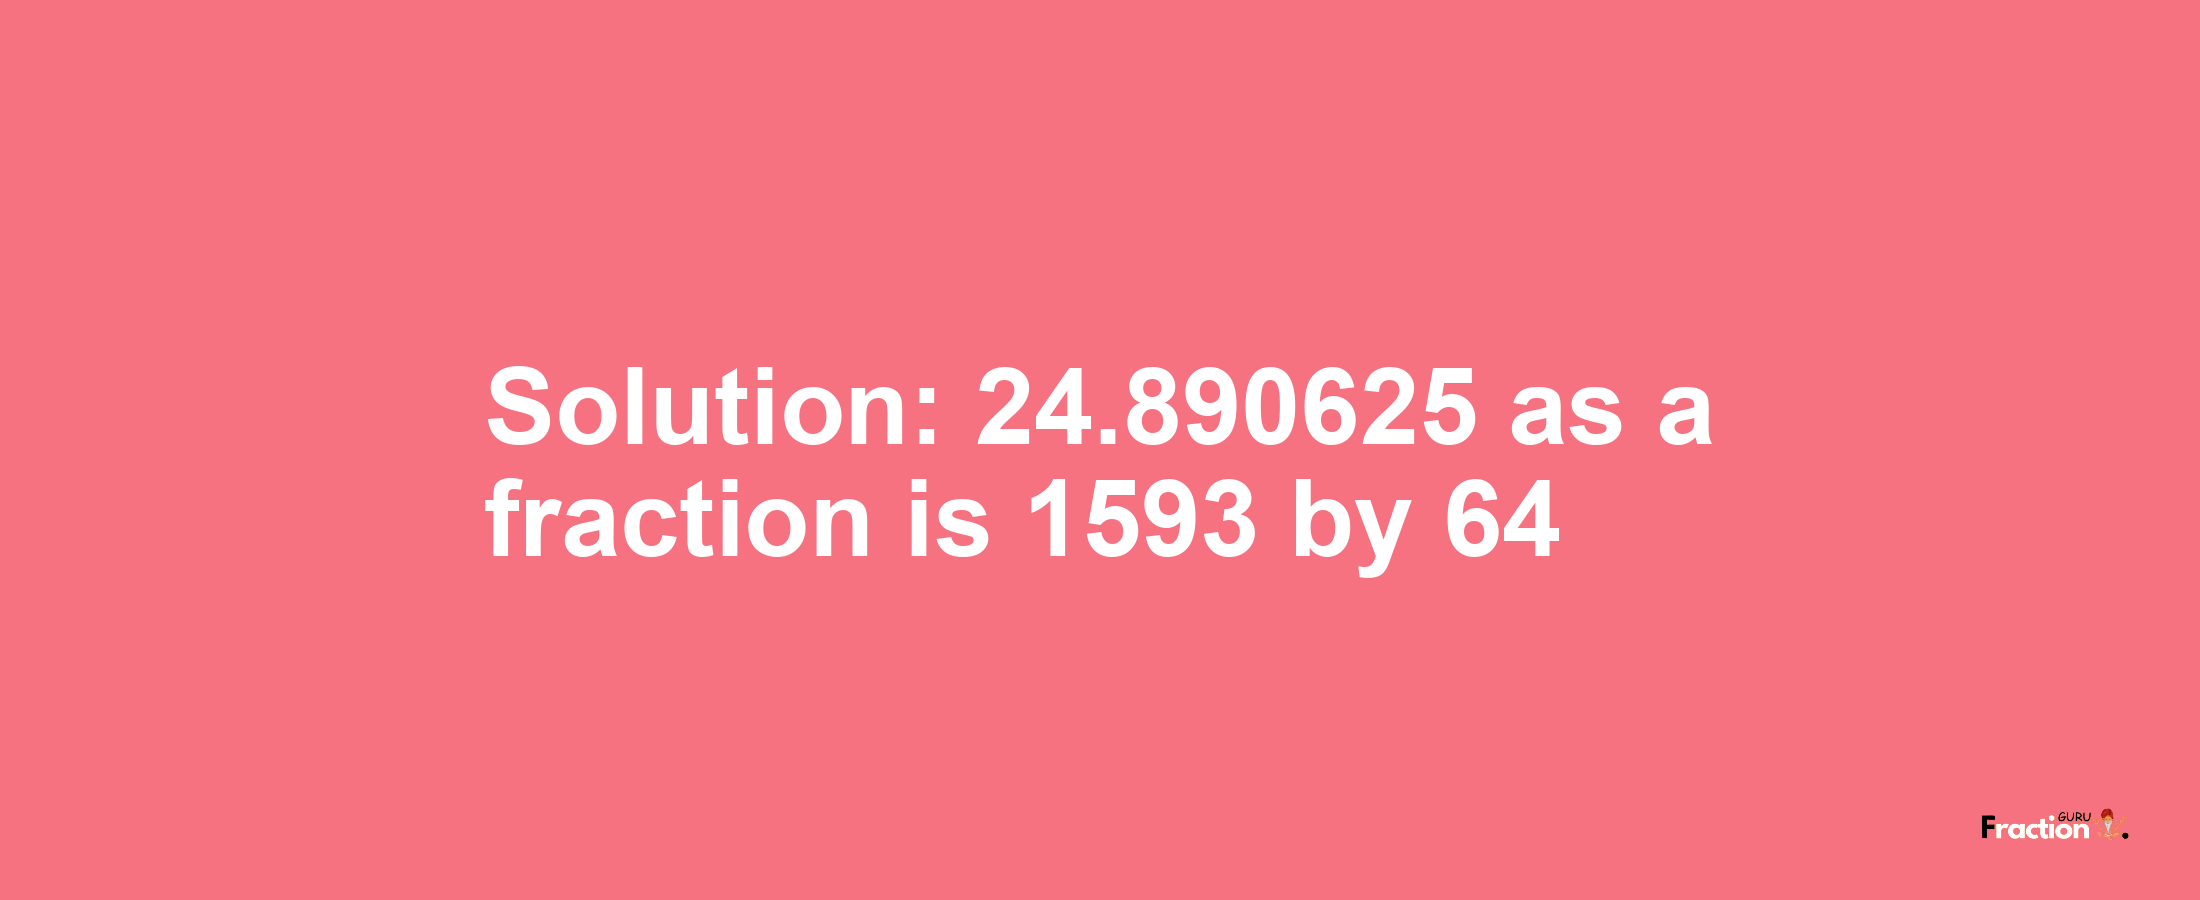 Solution:24.890625 as a fraction is 1593/64